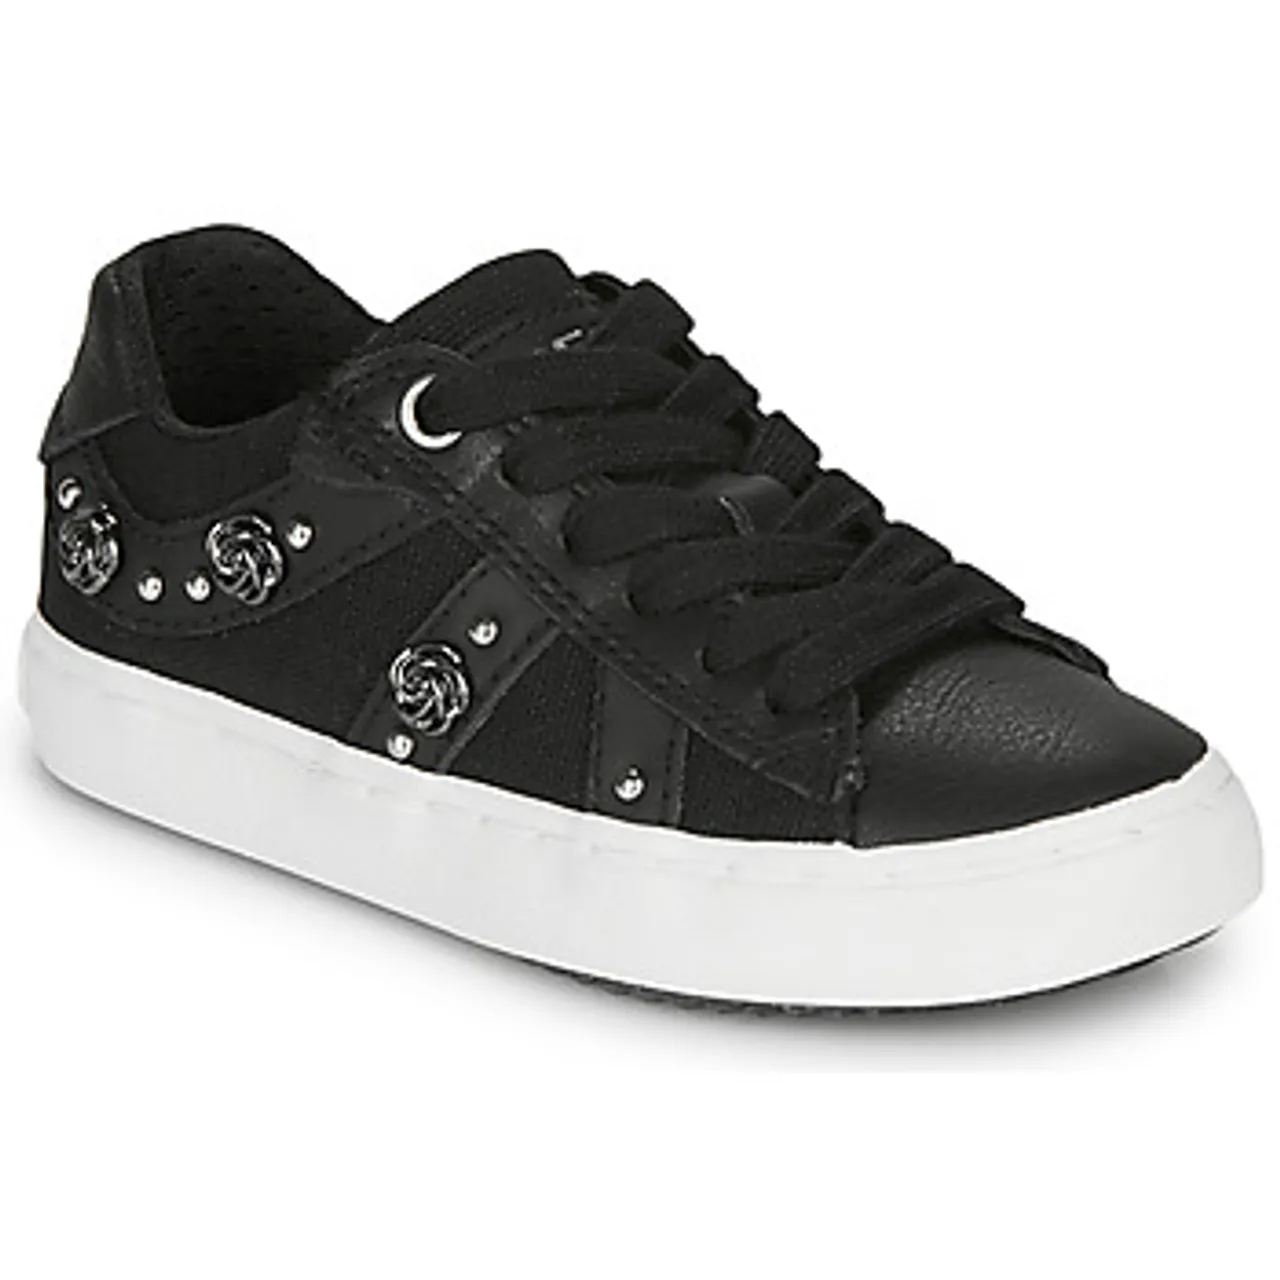 Geox  J KILWI GIRL  girls's Children's Shoes (Trainers) in Black